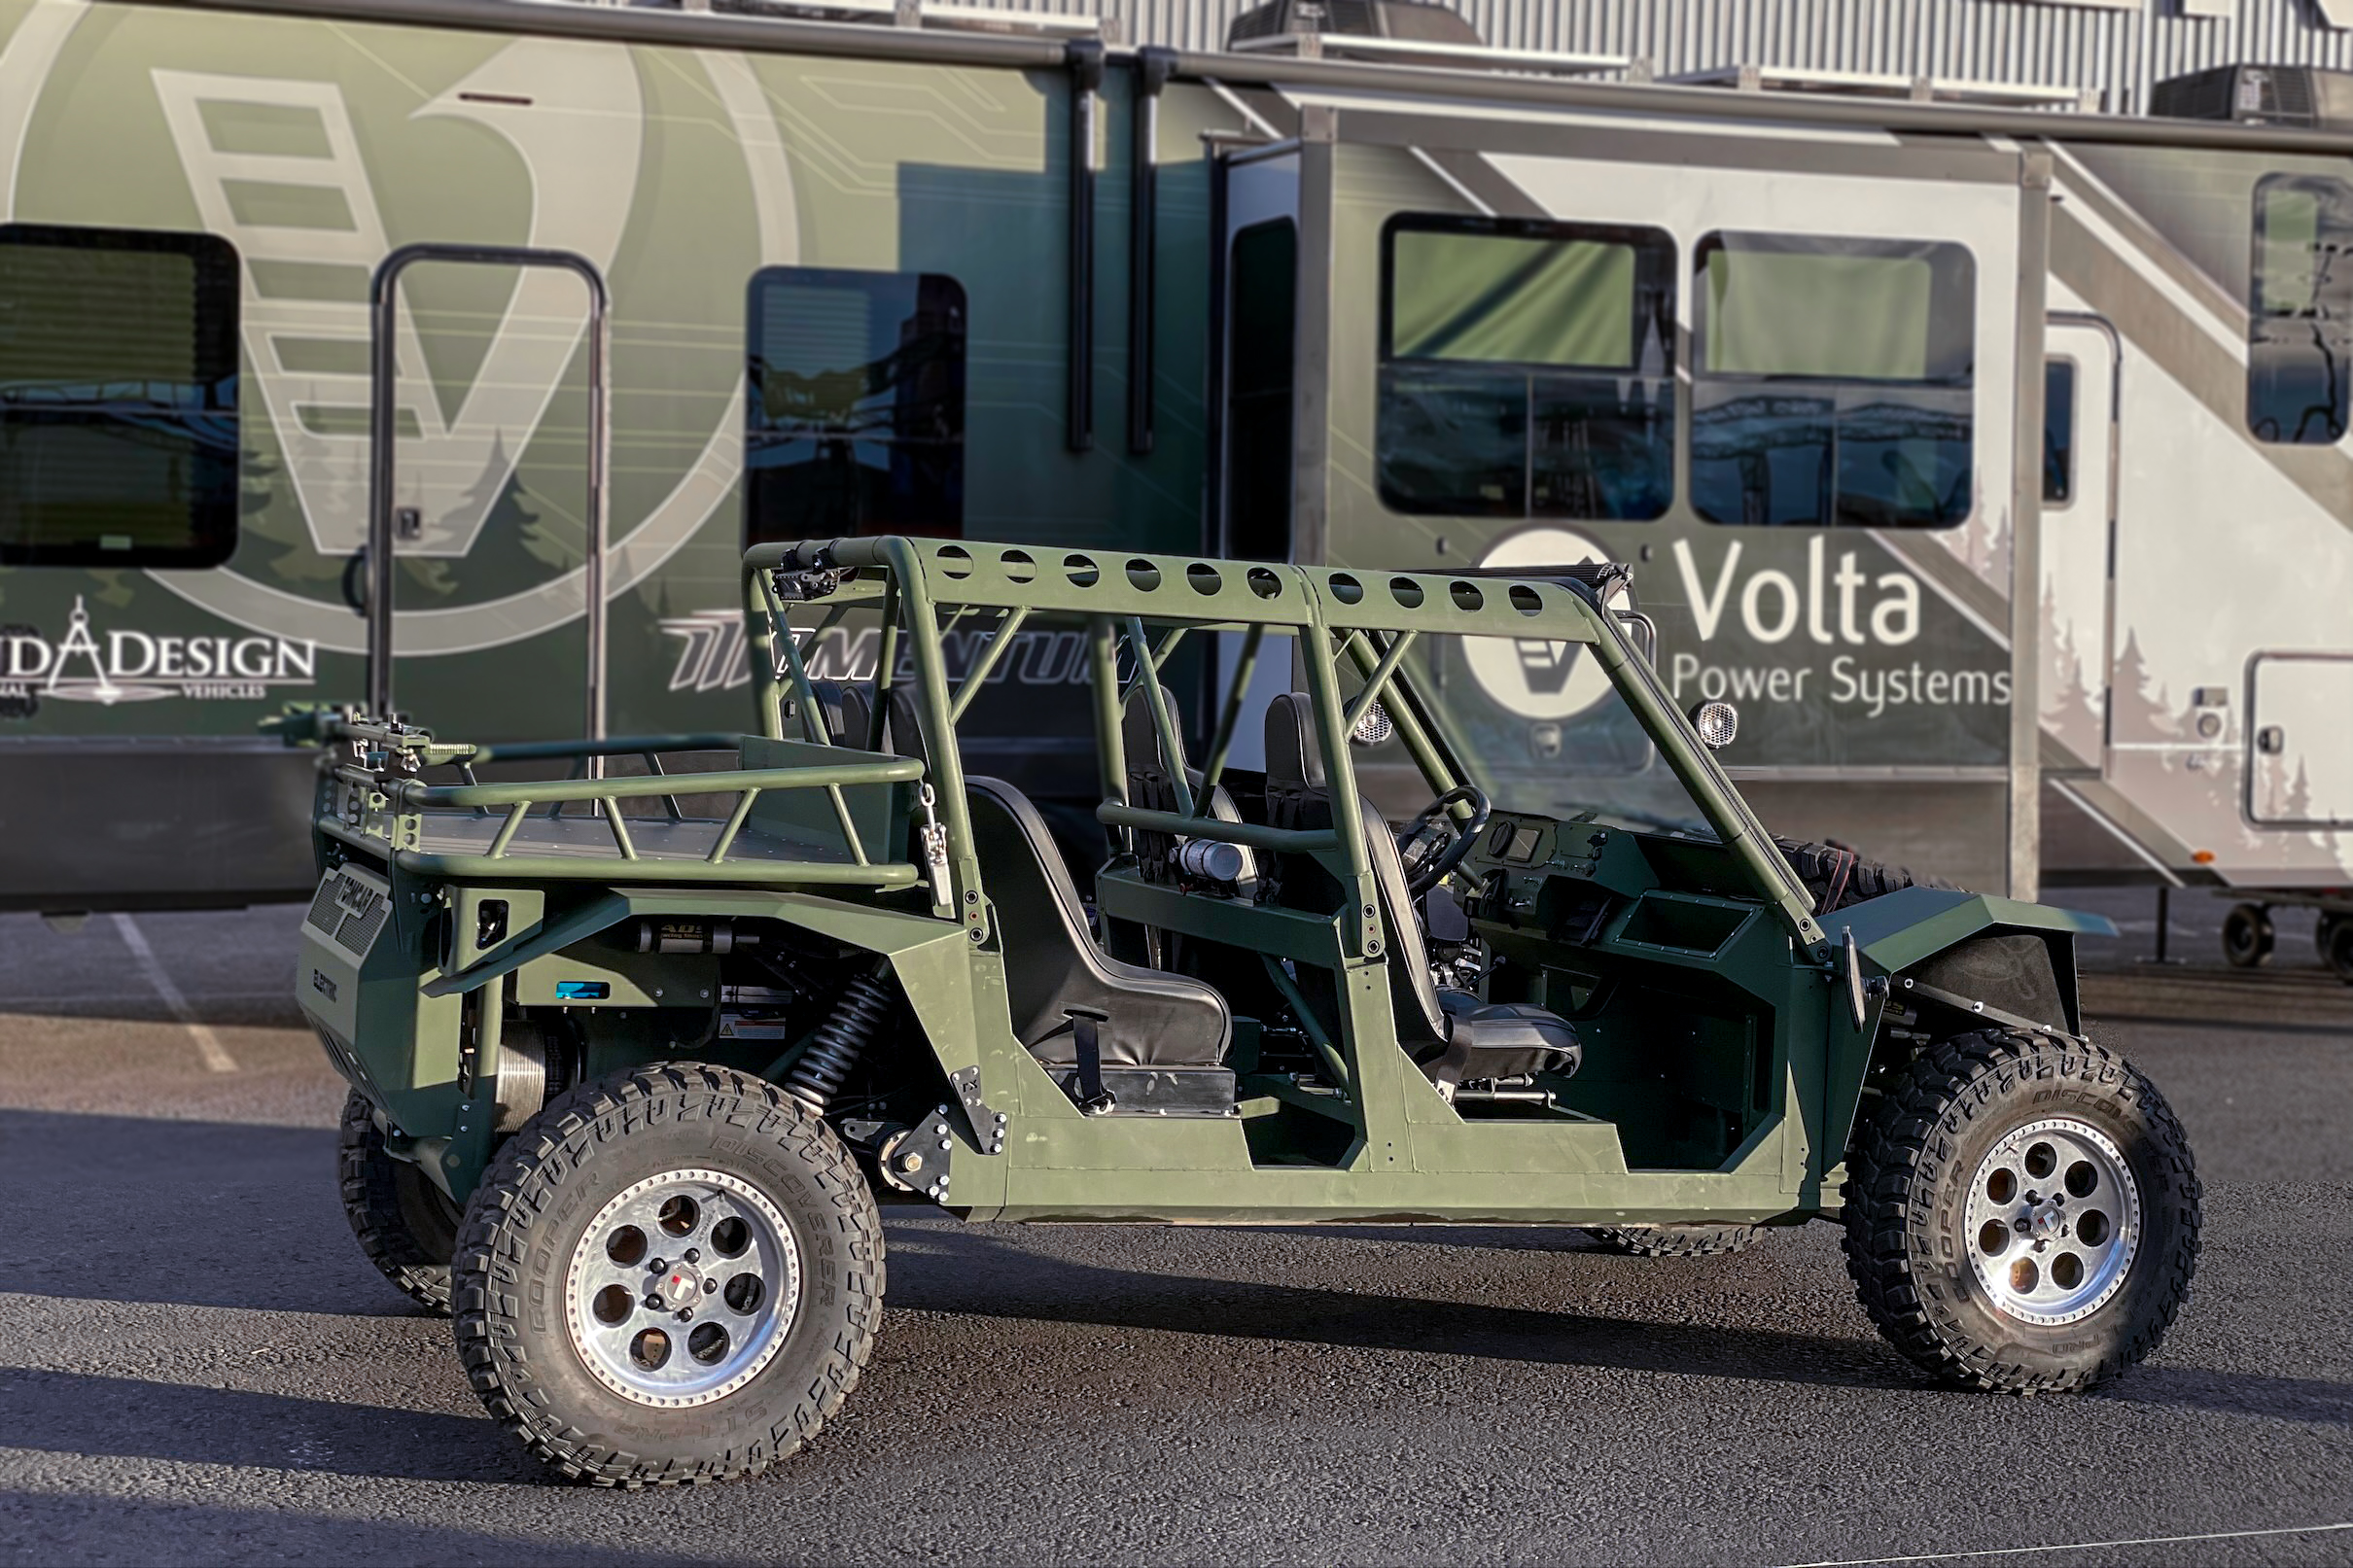 The Volta-equipped Grand Design Momentum Fifth Wheel and TOMCAR at SEMA in Las Vegas